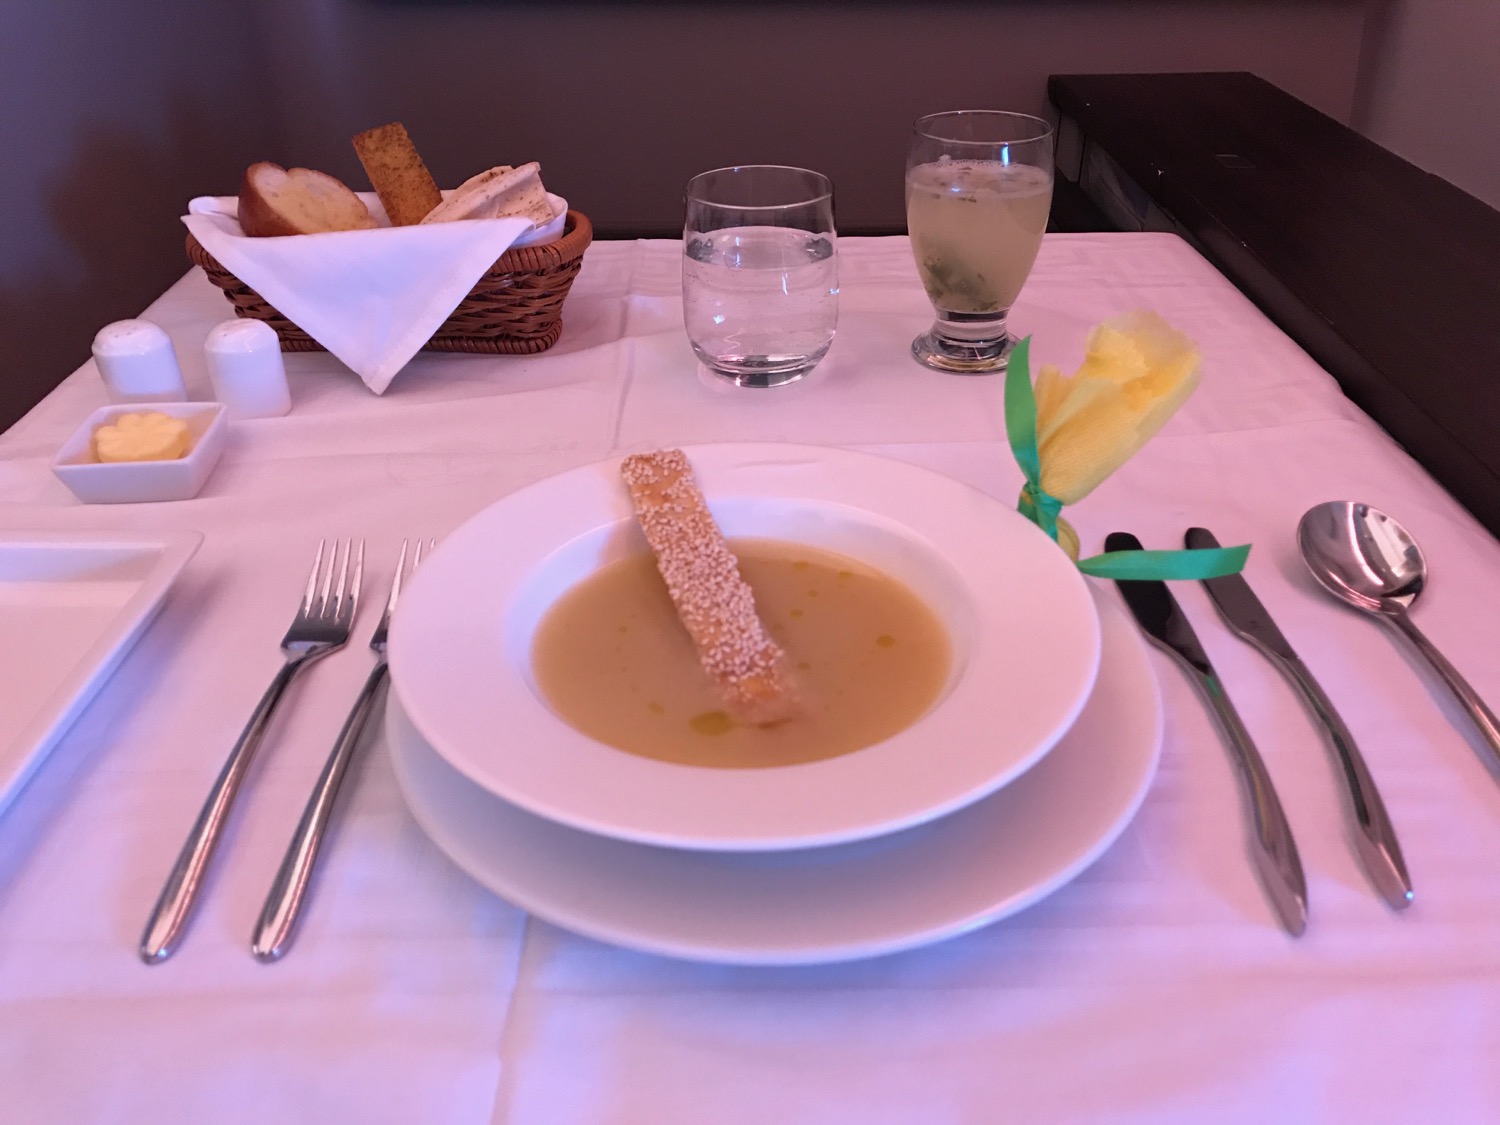 a plate of soup with bread stick on it